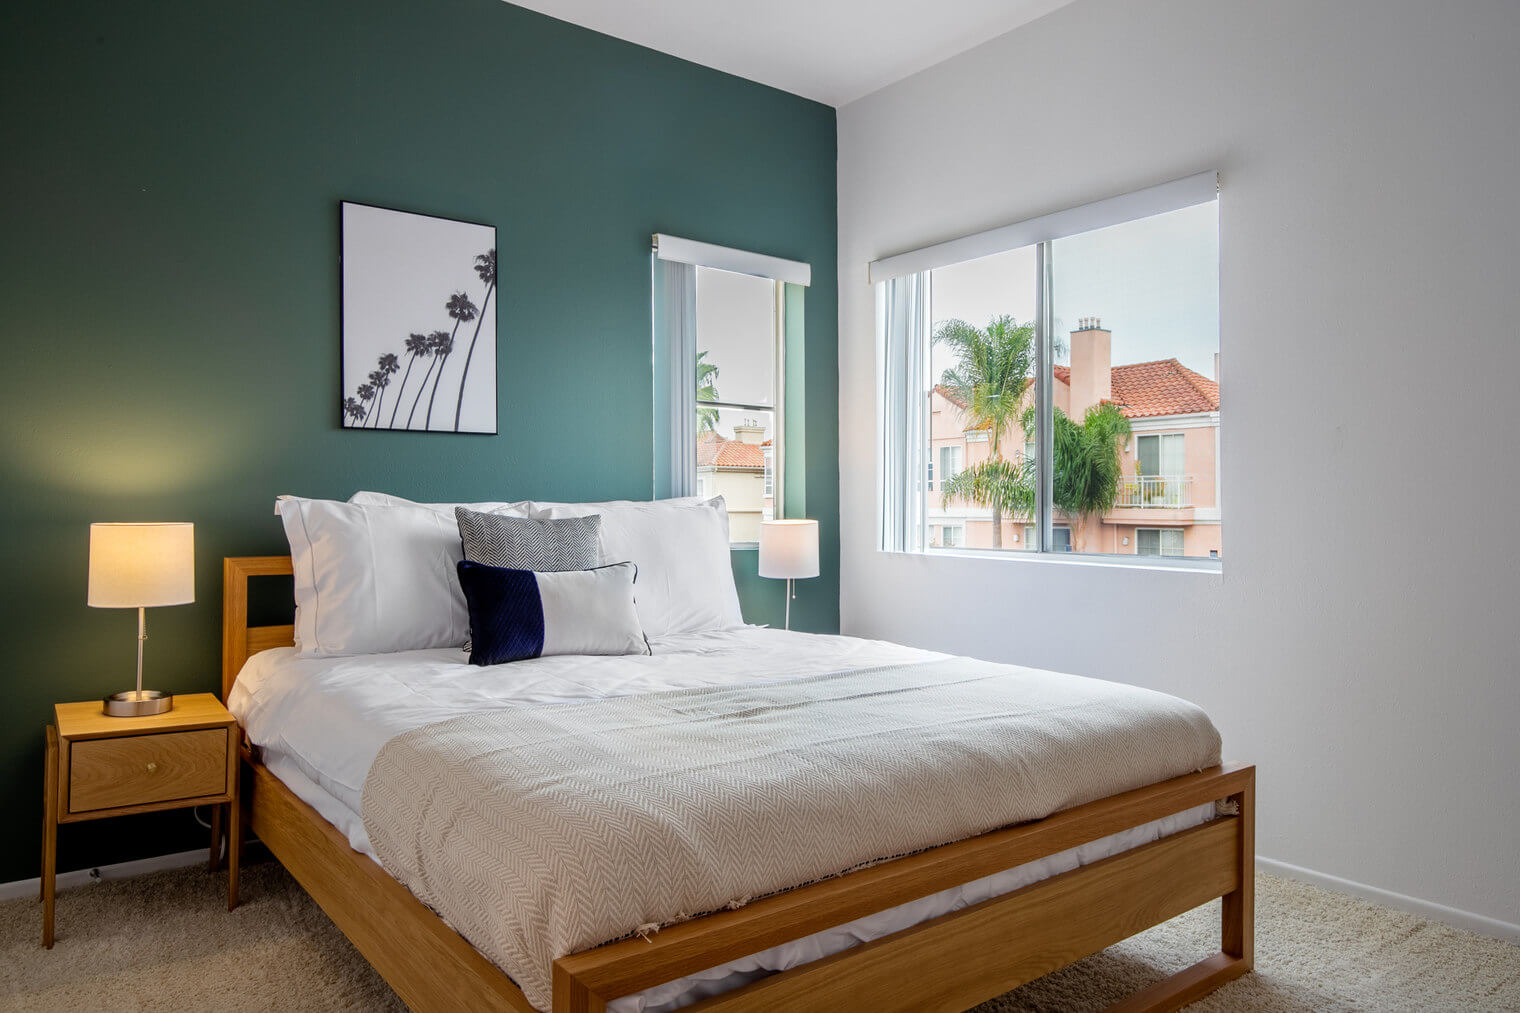 A dark green accent wall with a large wooden bed with lots of pillows and a light yellow blanket. Above the pillows is a framed black and white photo of plam trees. On the side of the bed is a window with a view of a pink house and large palm trees.